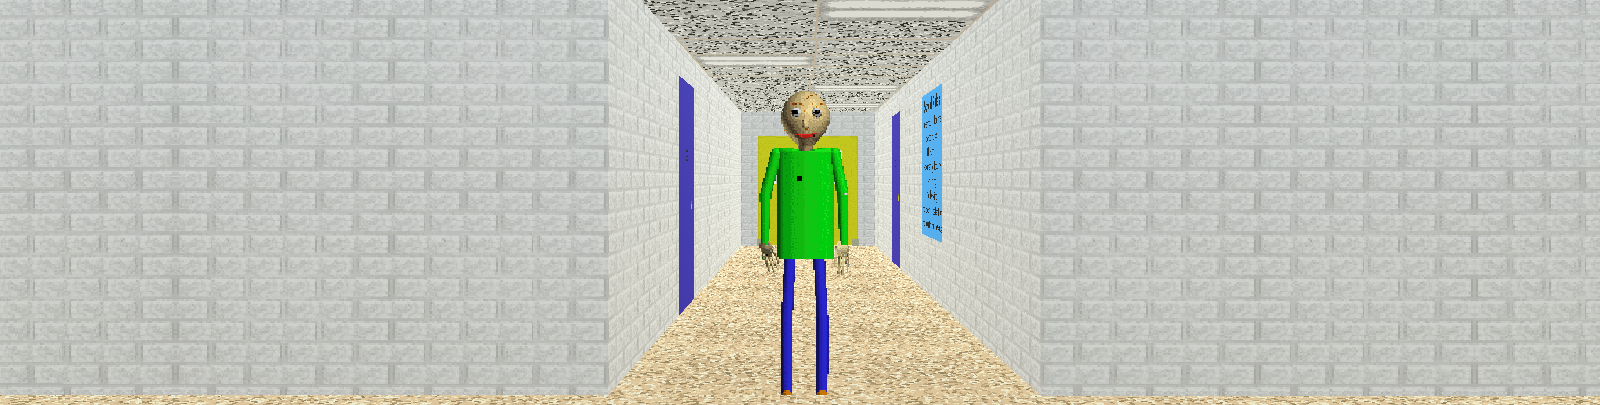 Baldi's Legacy Basics in Education and Learning Wayback Time 1.0